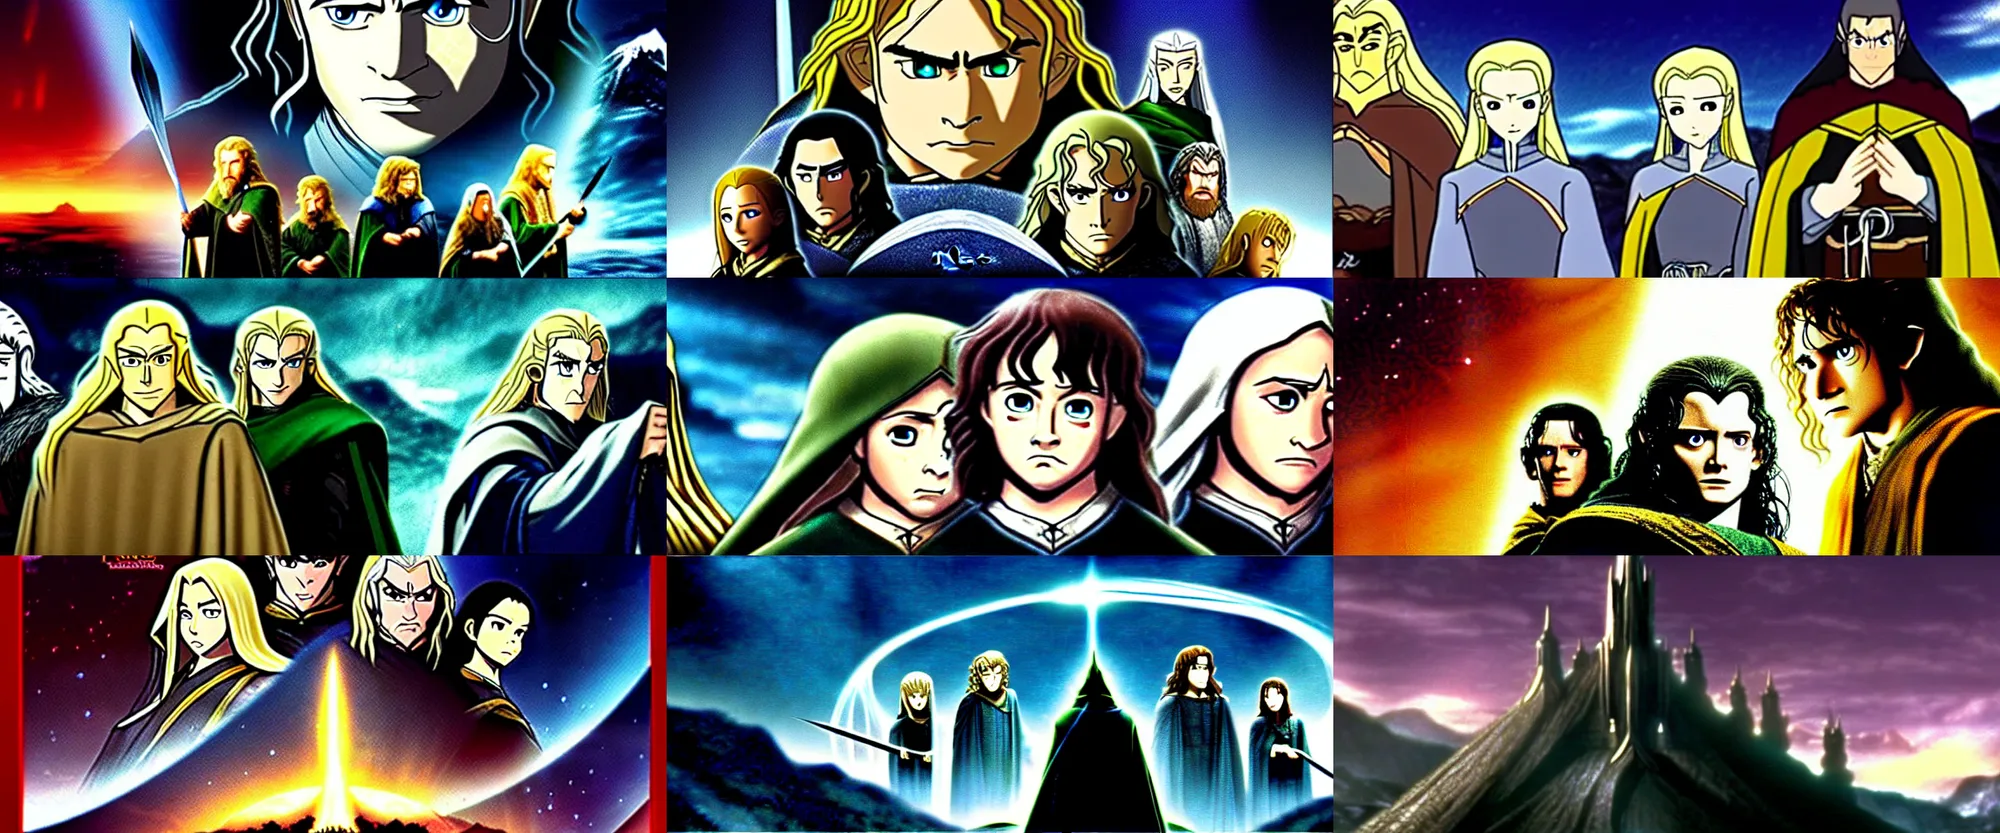 Prompt: The Lord of the Rings: The Two Towers (2002), Toonami